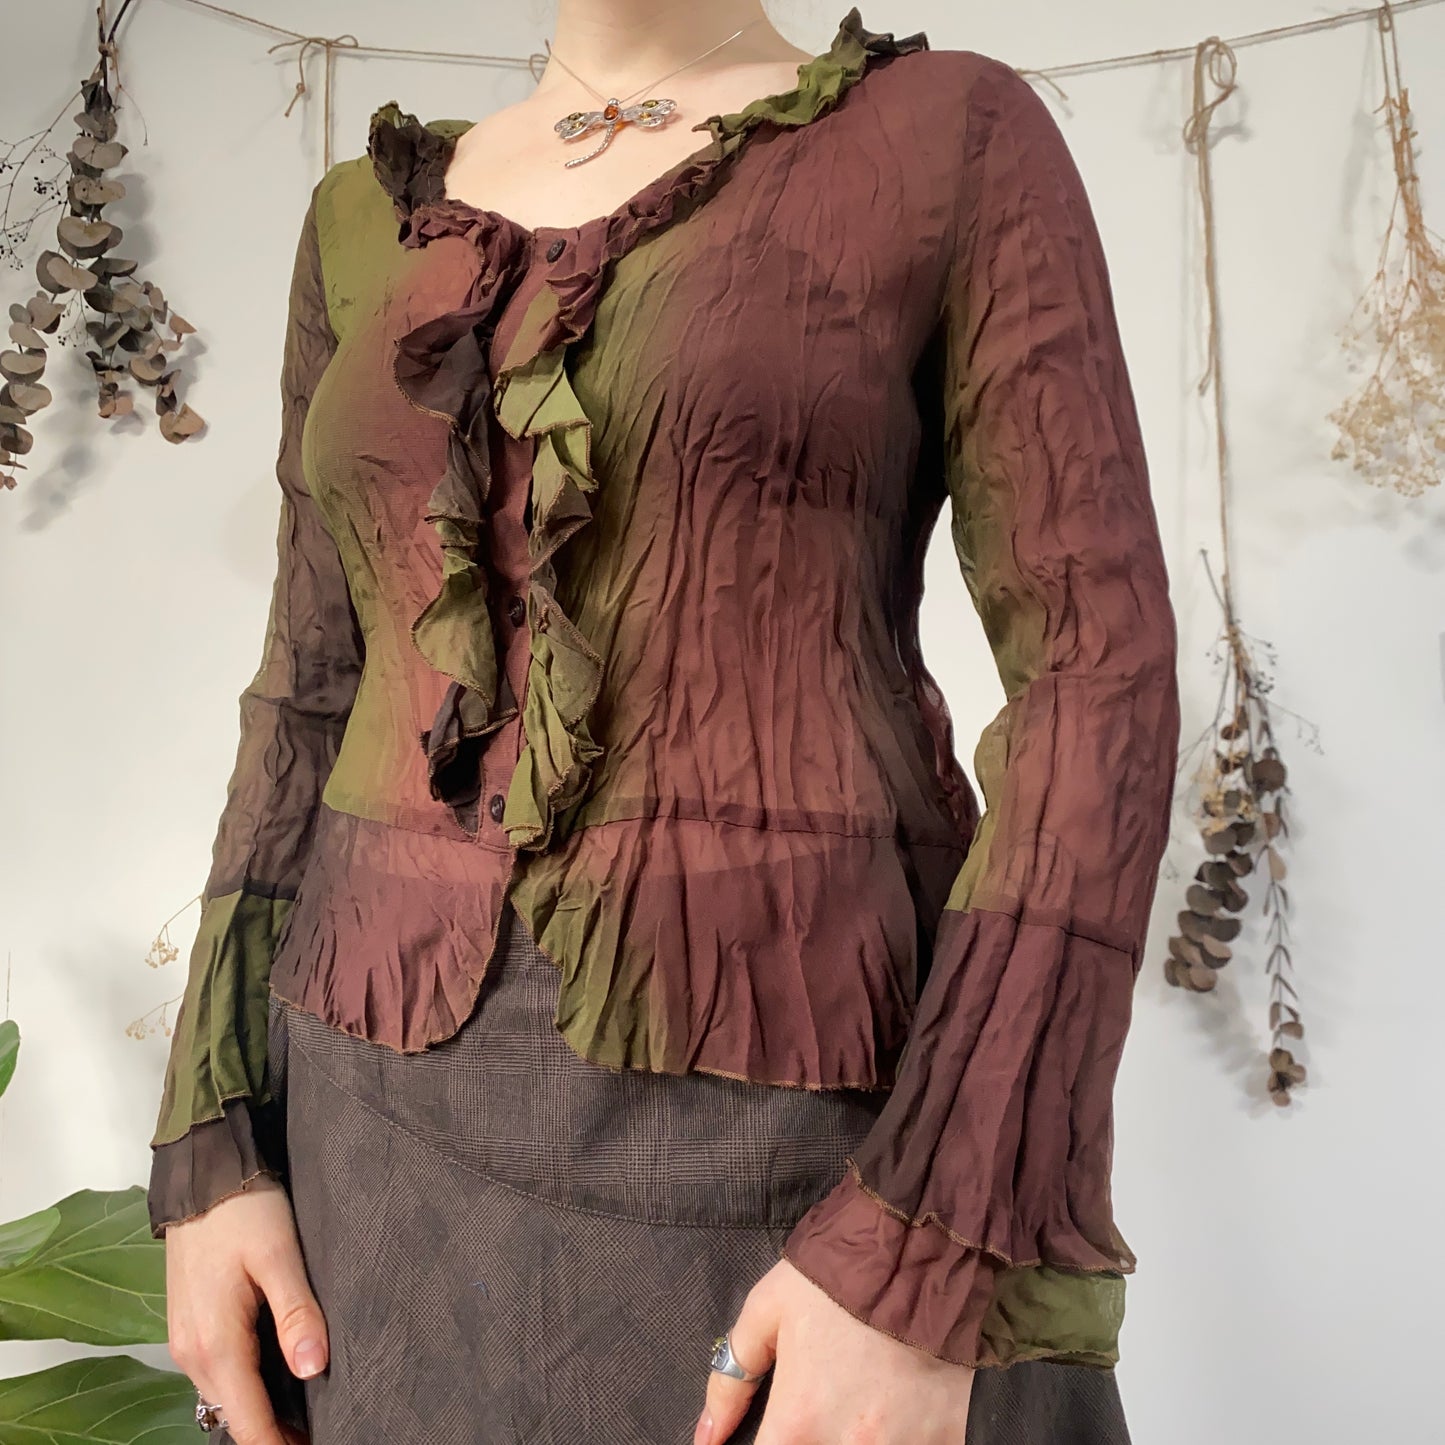 Earthy grunge top - size M